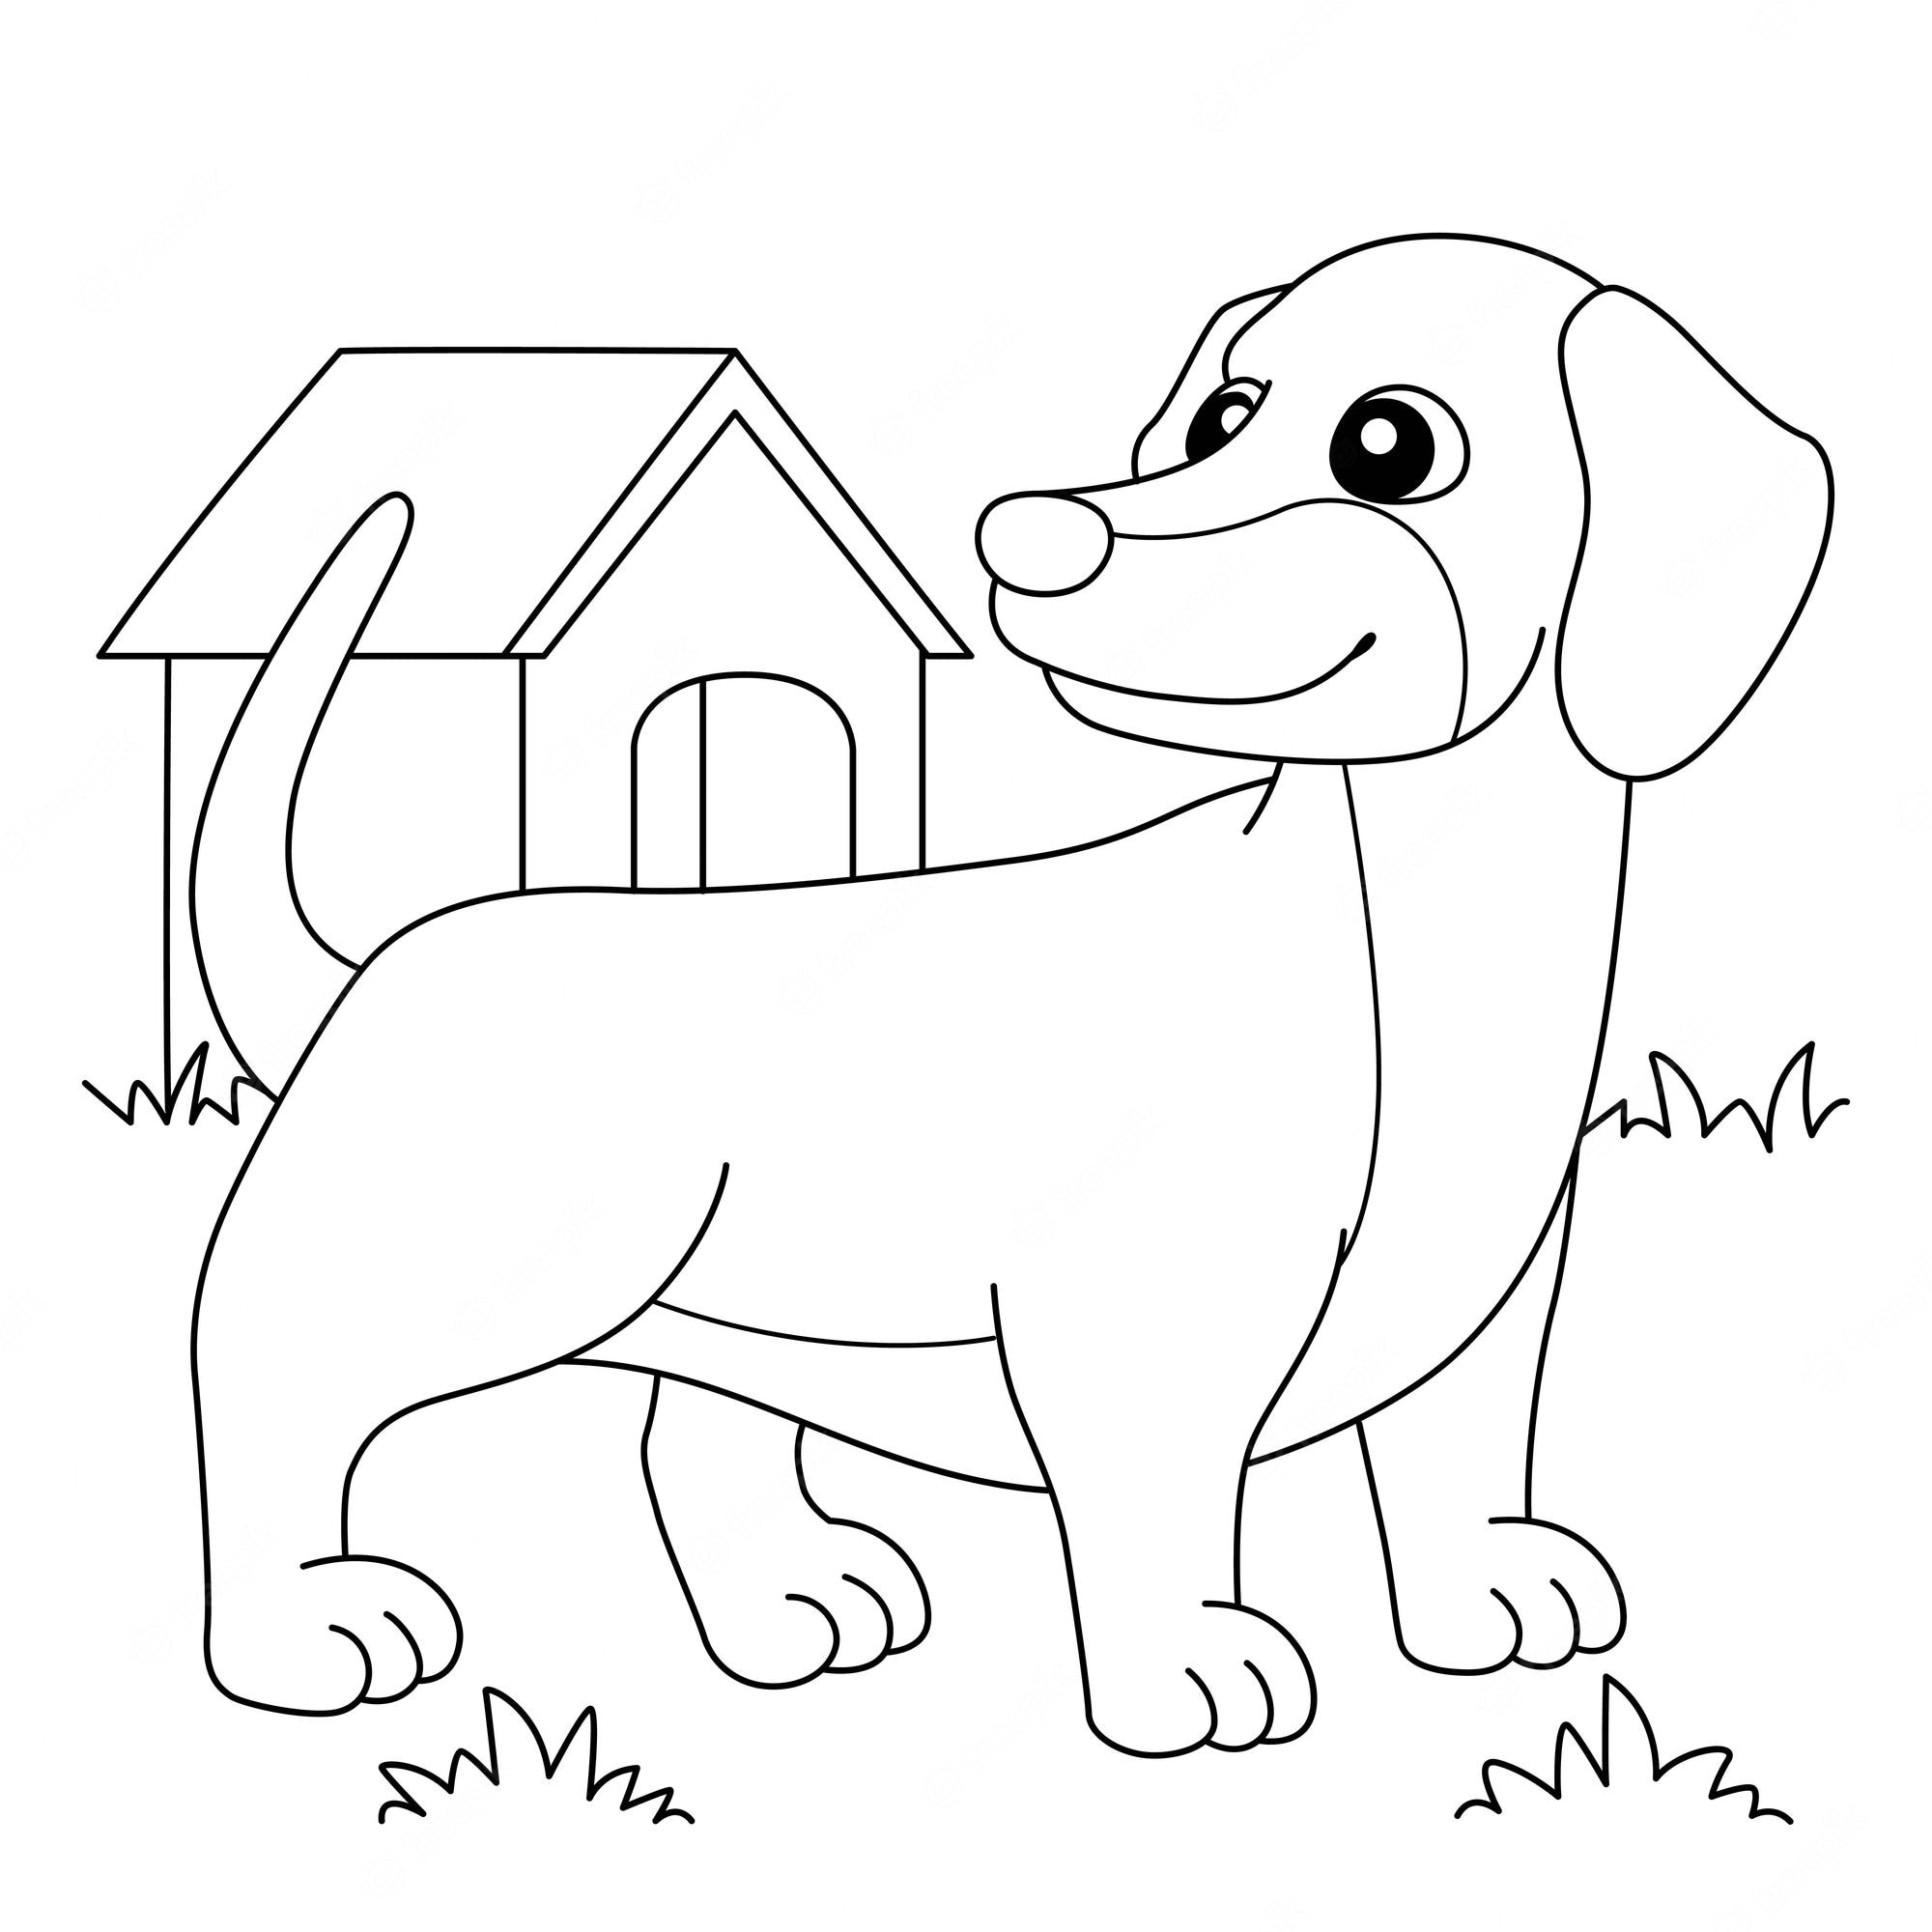 Premium Vector | Dachshund dog coloring page for kids